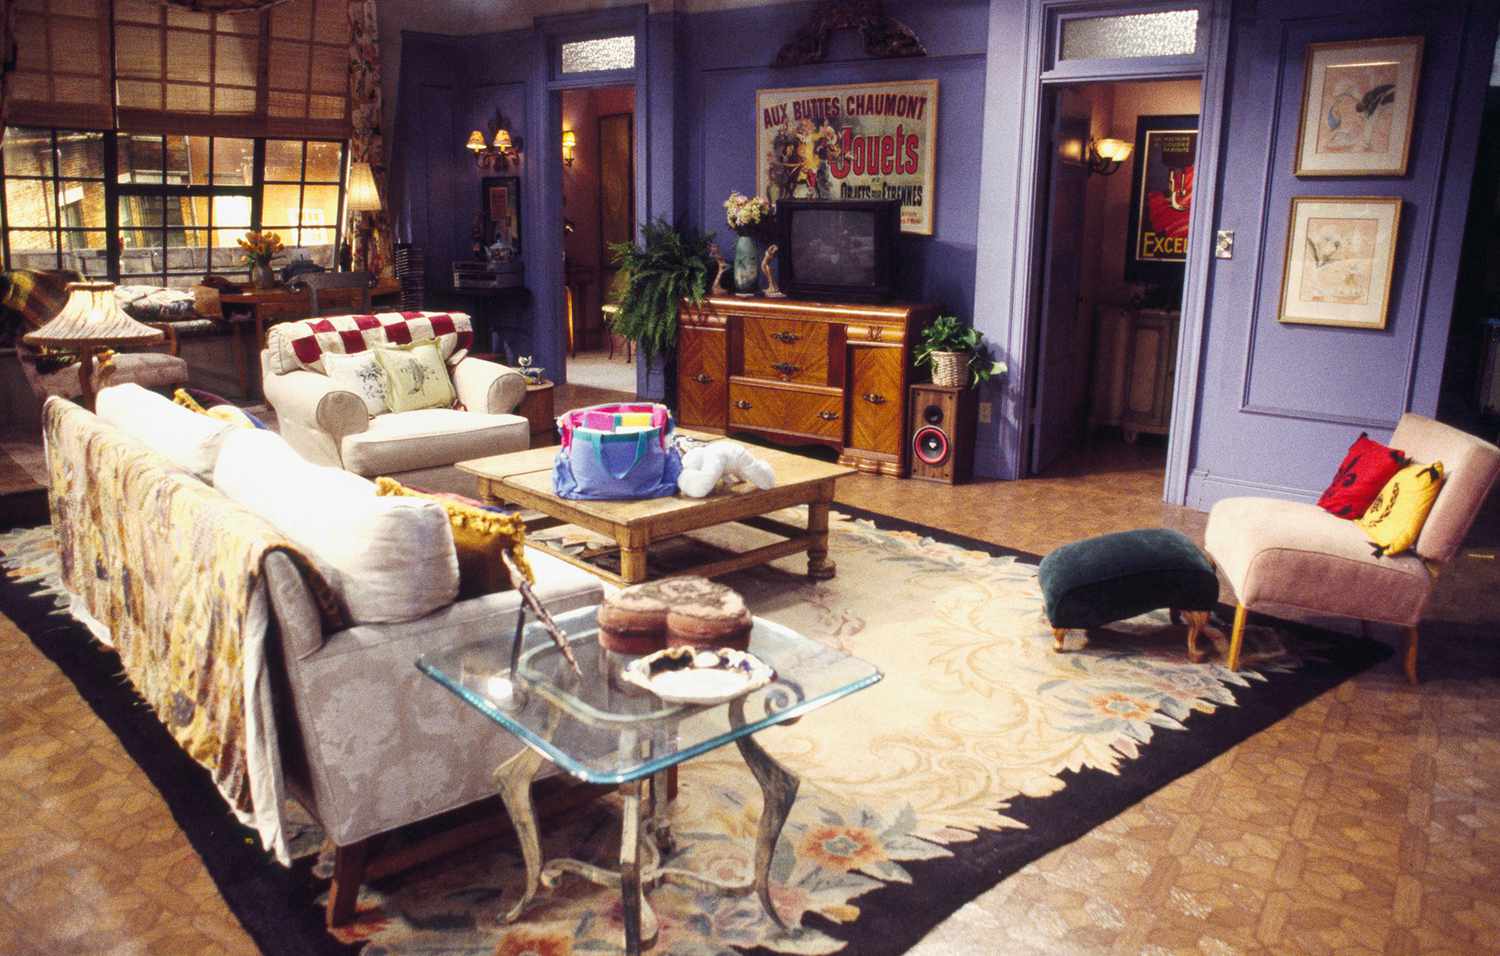 Set of Monica Geller's apartment in "Friends" tv show with shabby-chic style decor